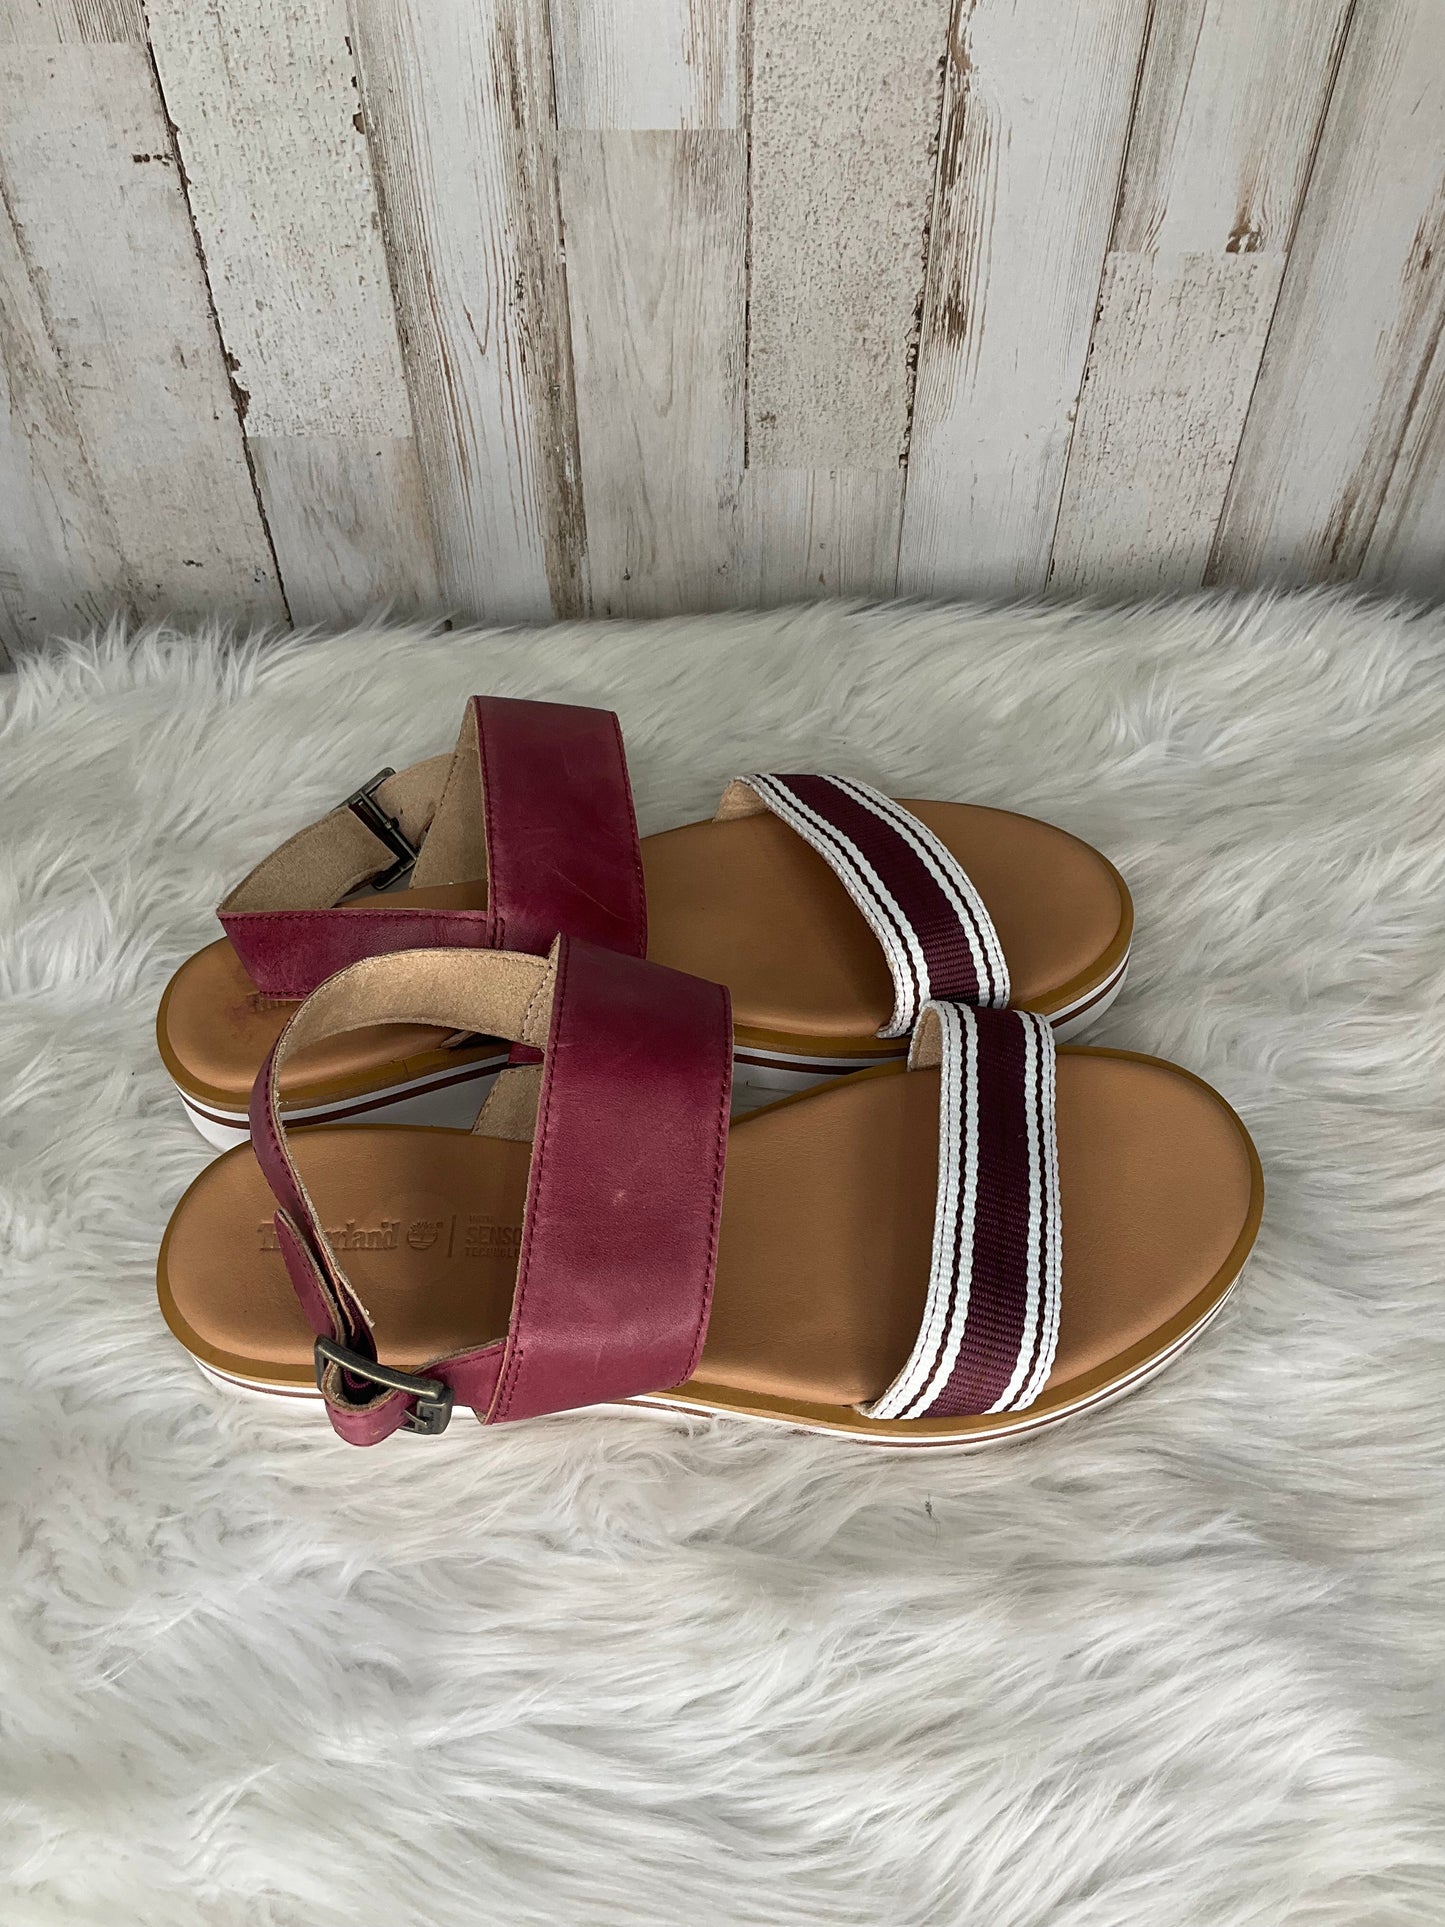 Sandals Flats By Timberland  Size: 9